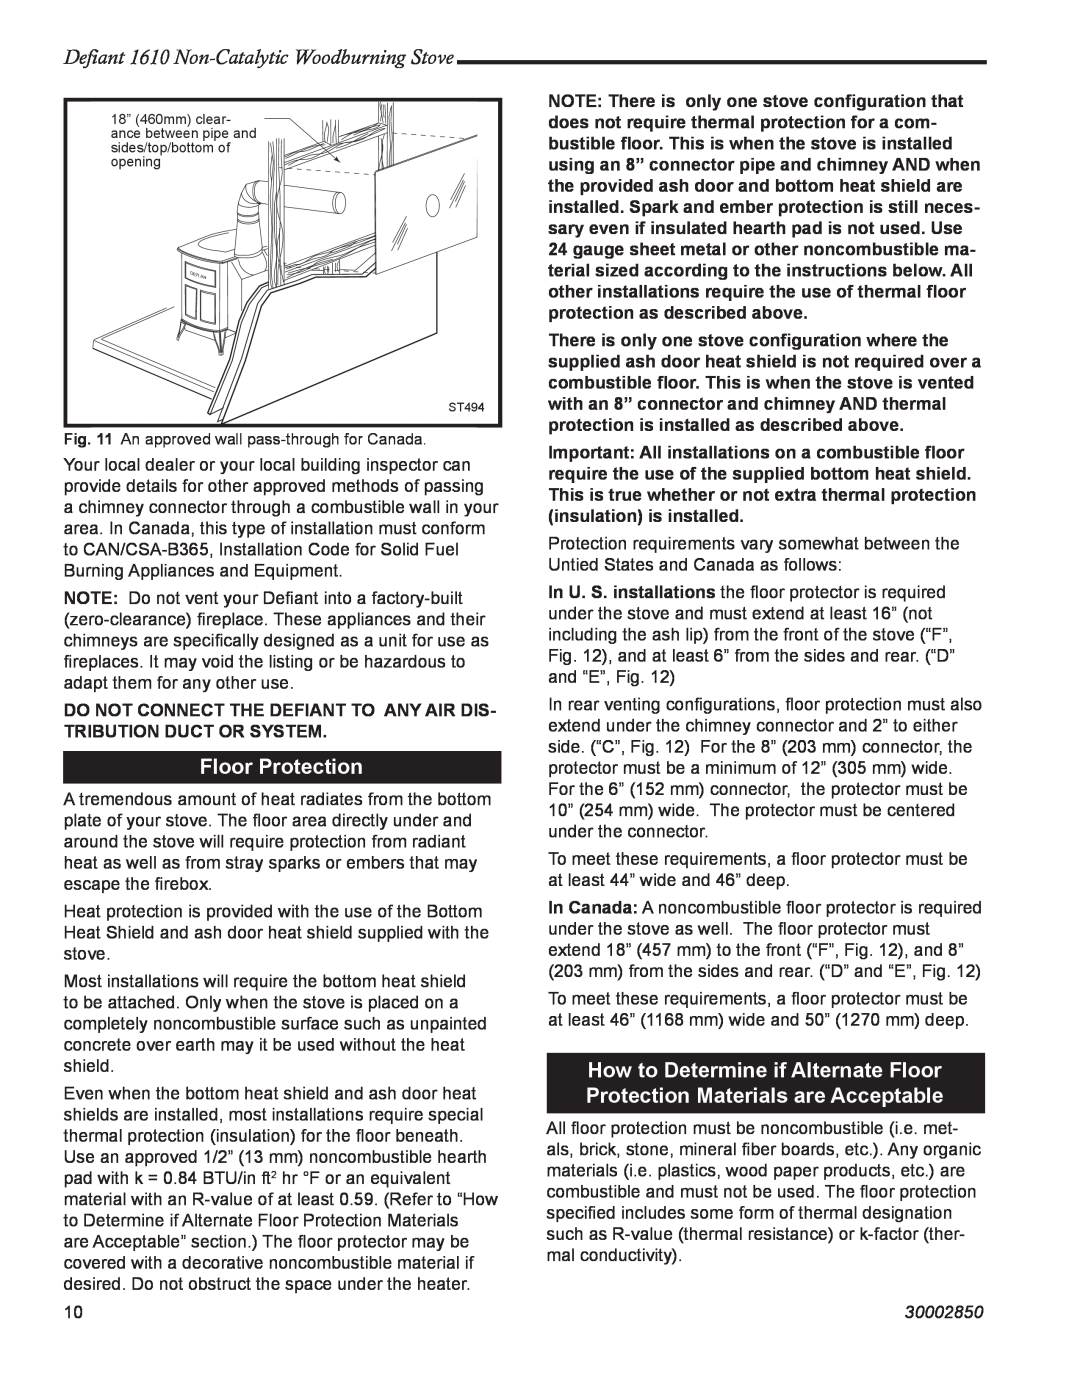 Vermont Casting installation instructions Floor Protection, Defiant 1610 Non-CatalyticWoodburning Stove, 30002850 